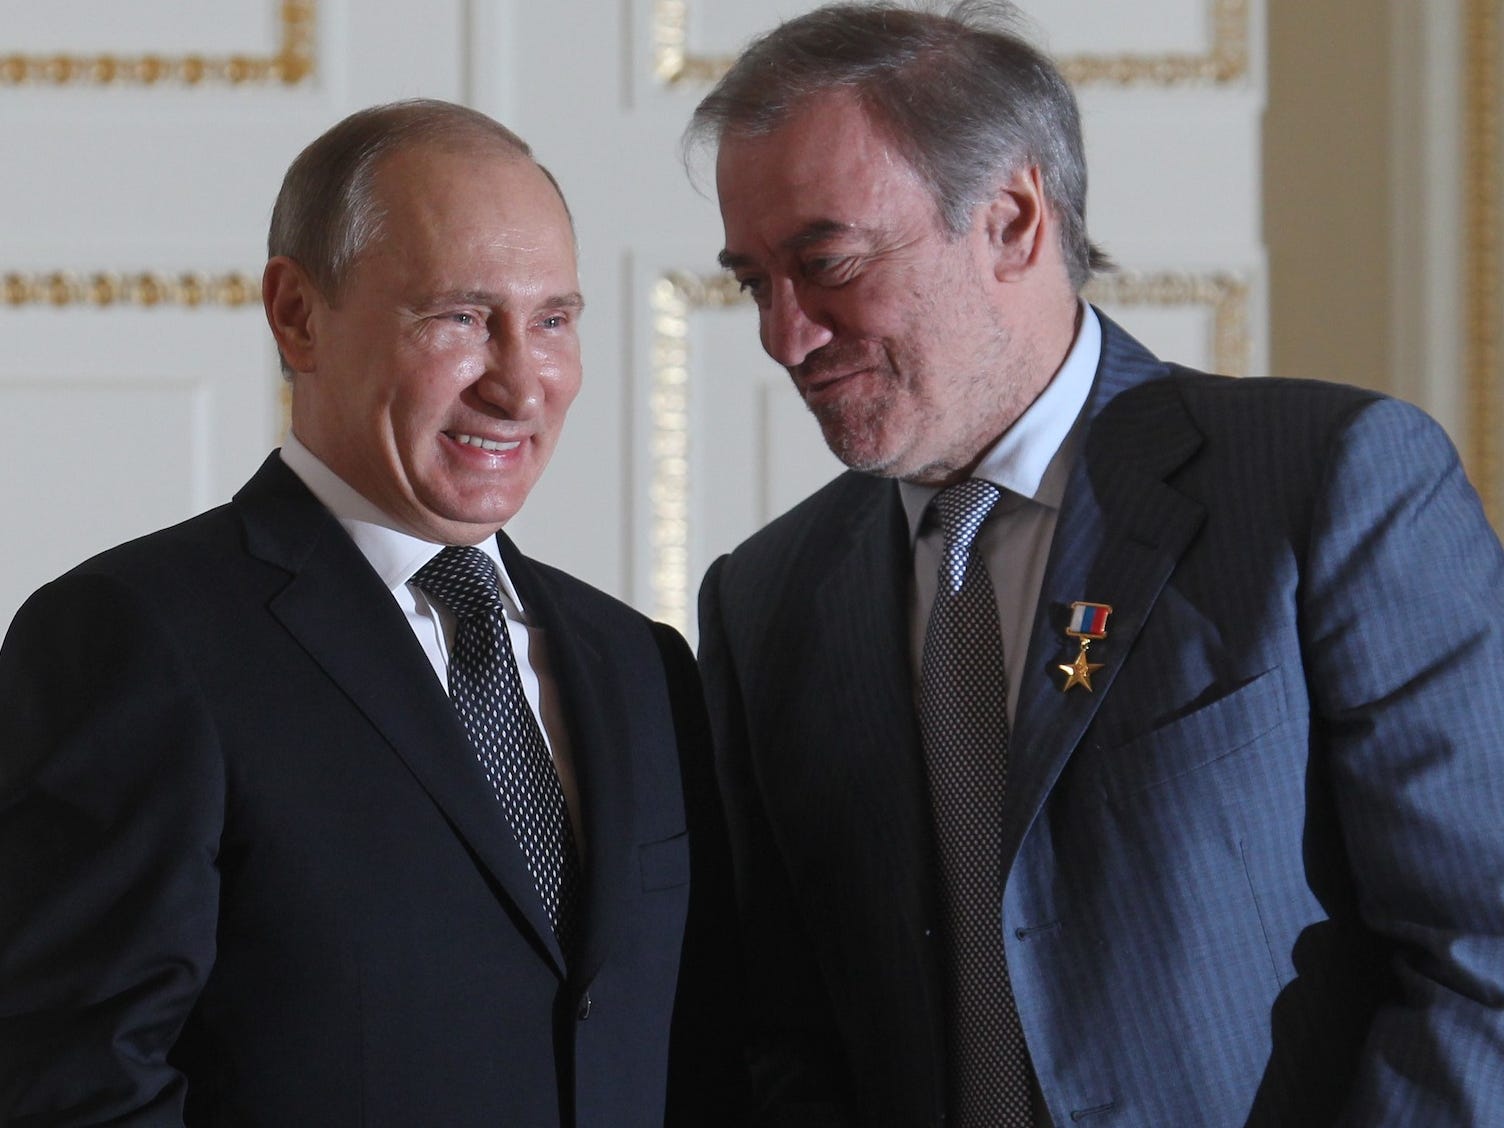 Valery Gergiev and Vladimir Putin are pictured talking together.